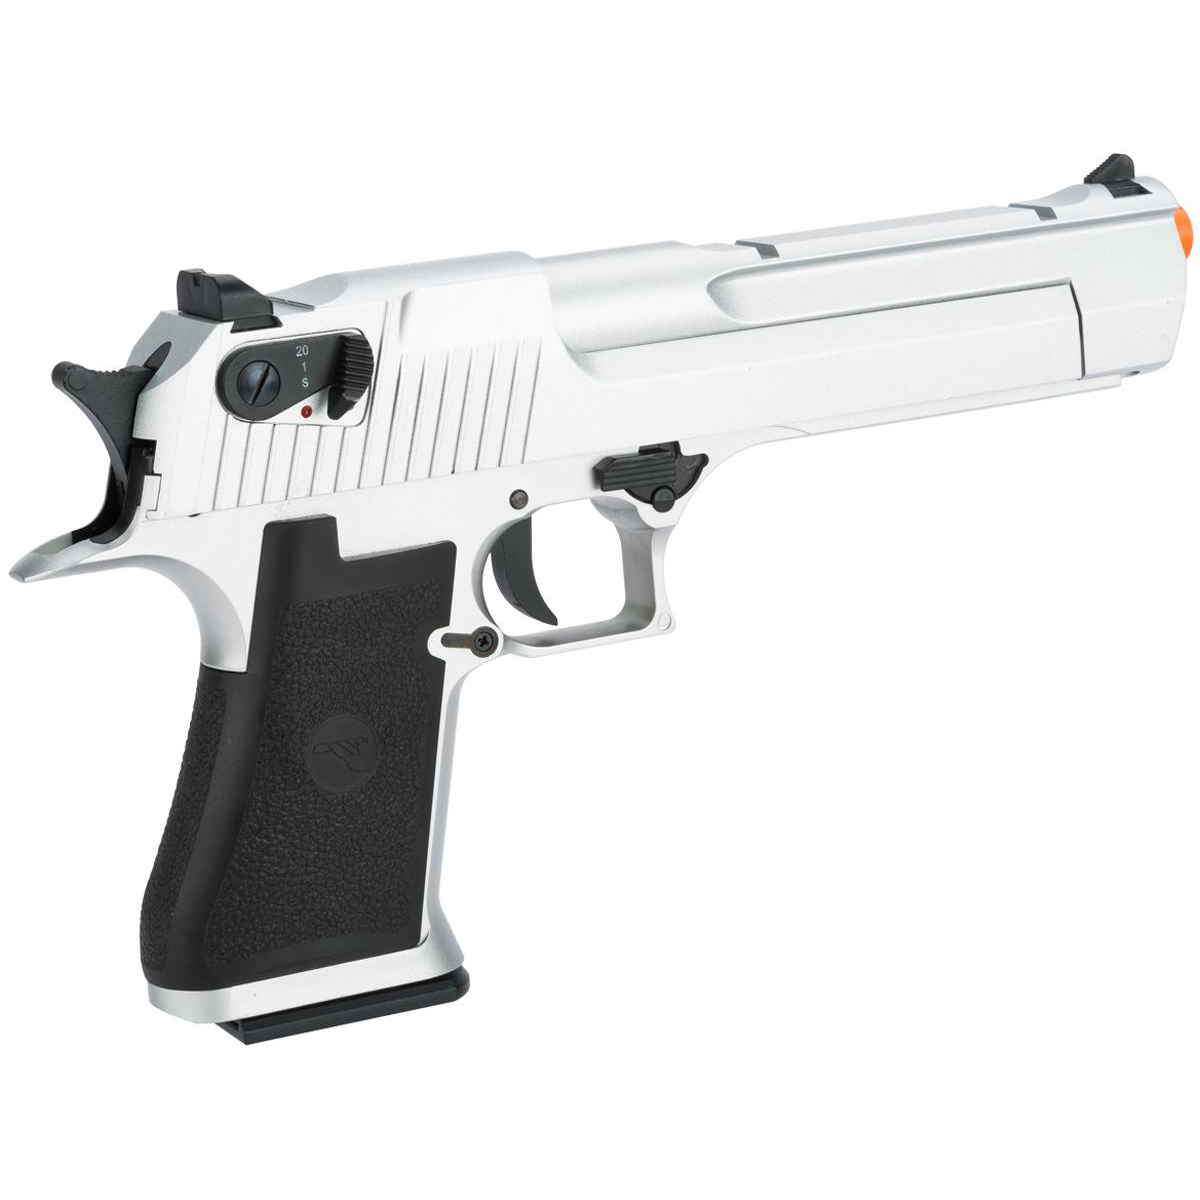 Magnum Research Licensed Semi/Full Auto Metal Desert Eagle CO2 Gas Blowback  Airsoft Pistol by KWC (Color: Silver) • Tri-City Extreme